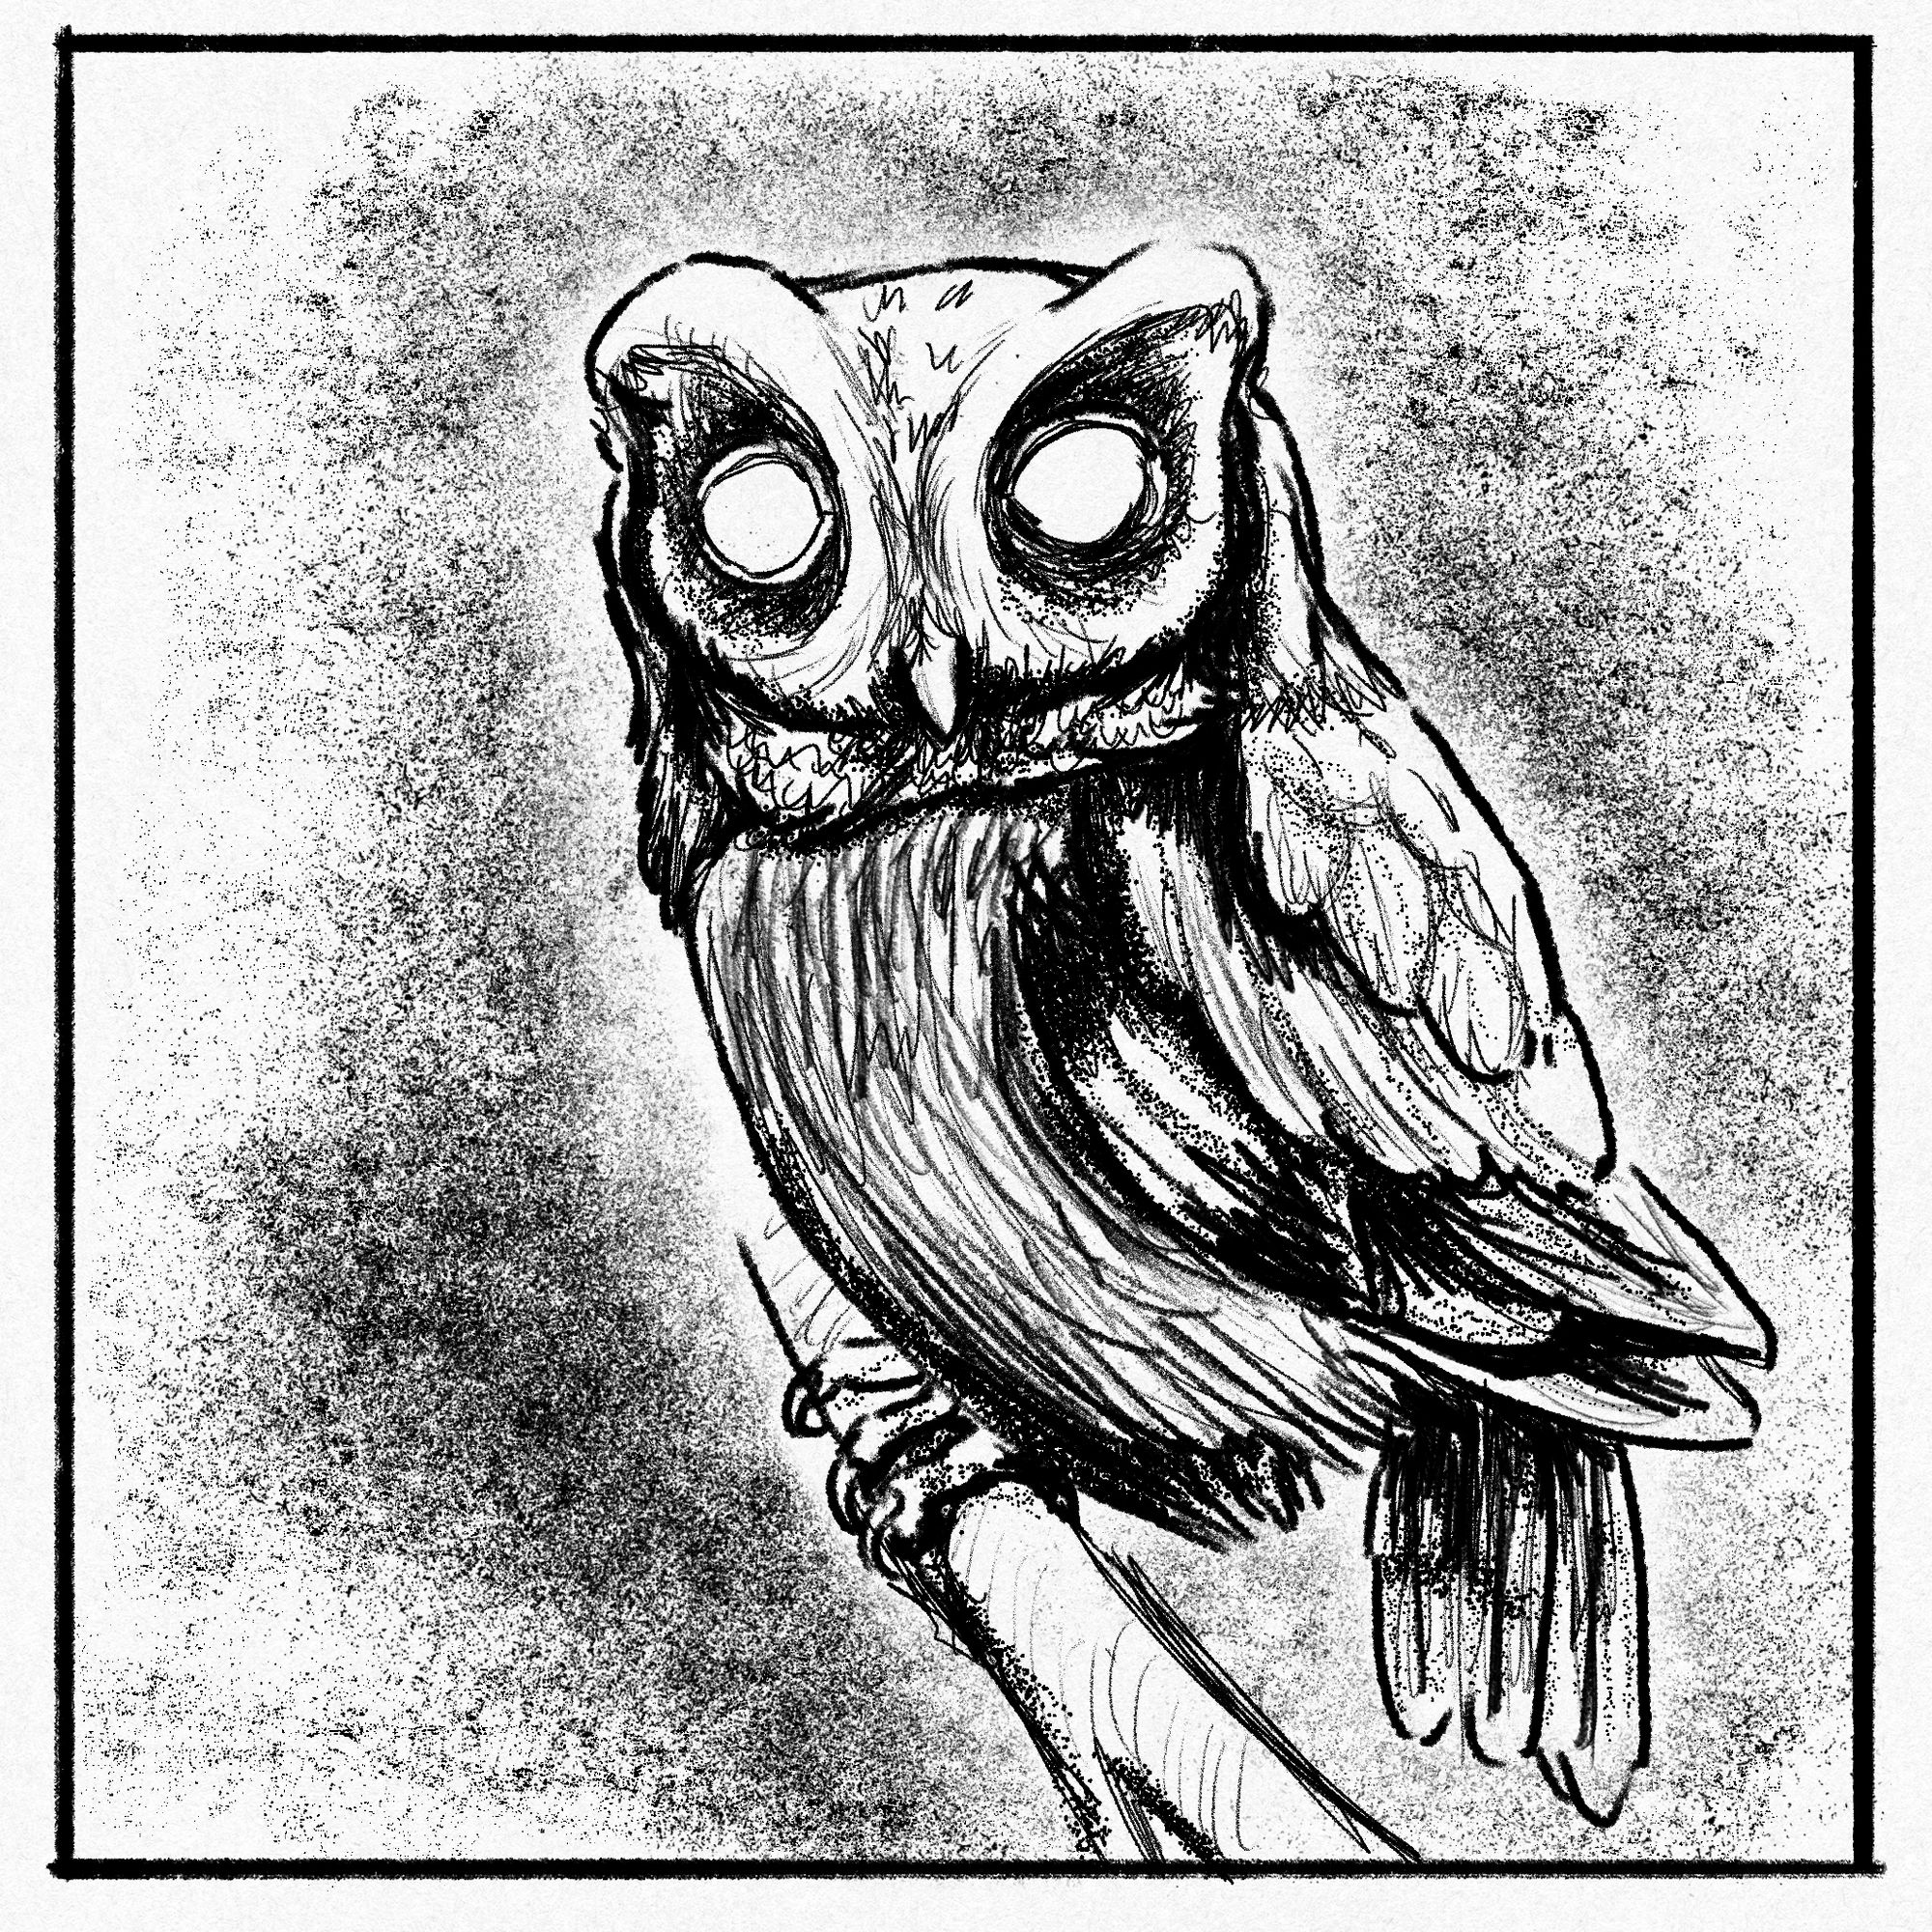 a black and white digital drawing of an owl with blank white eyes